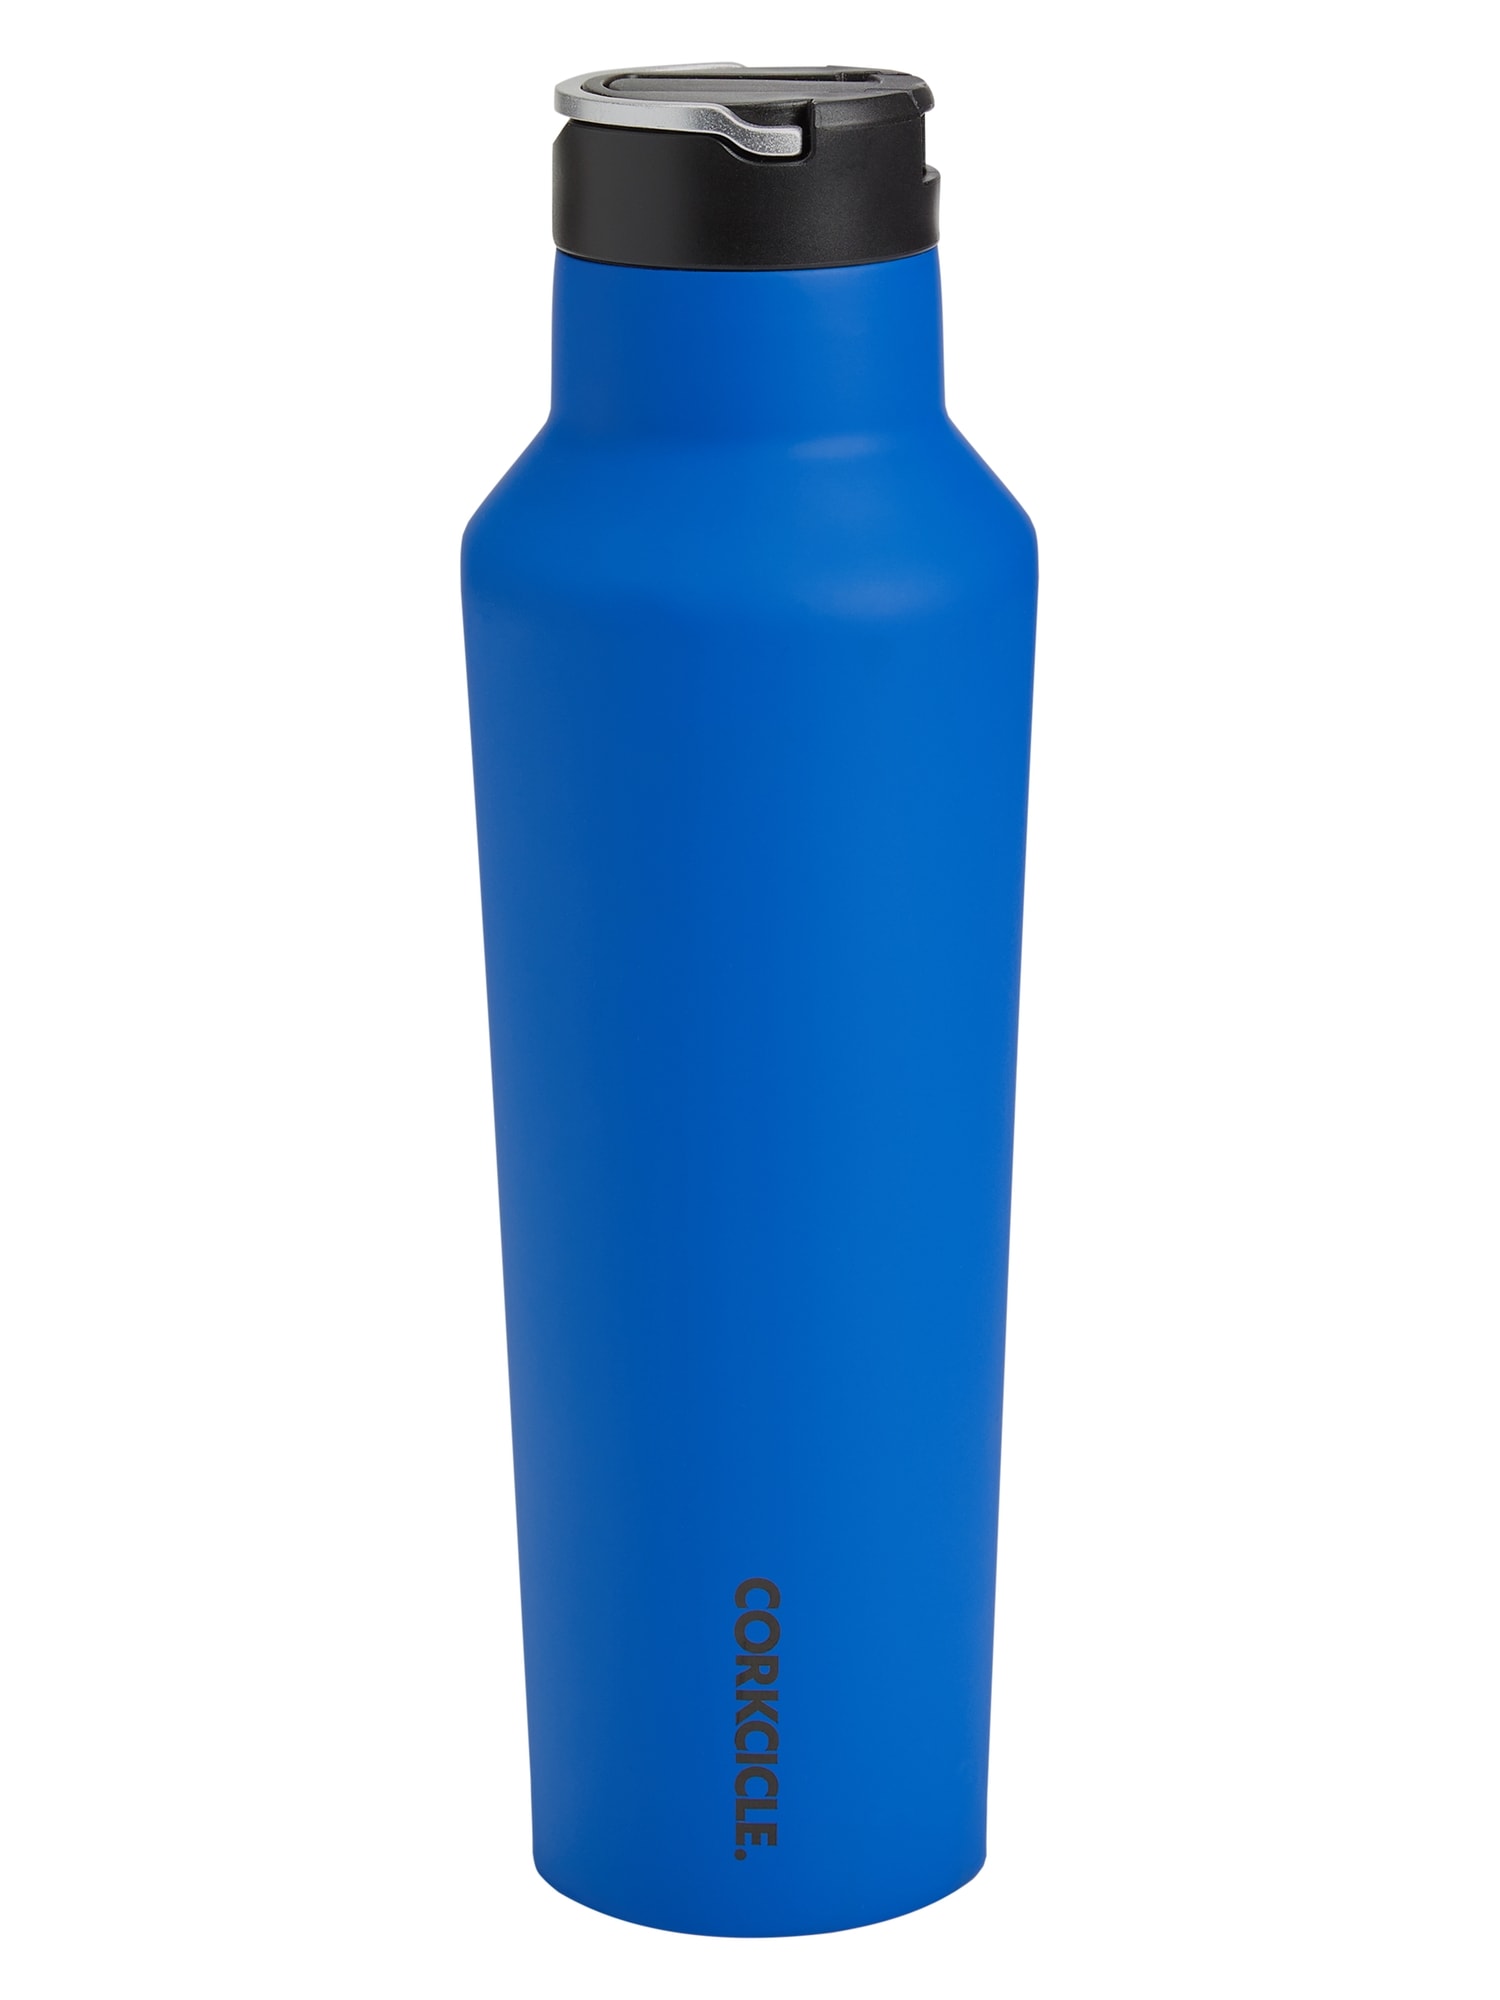 Corkcicle 20 Ounce Sport Canteen Stainless Steel Water Bottle